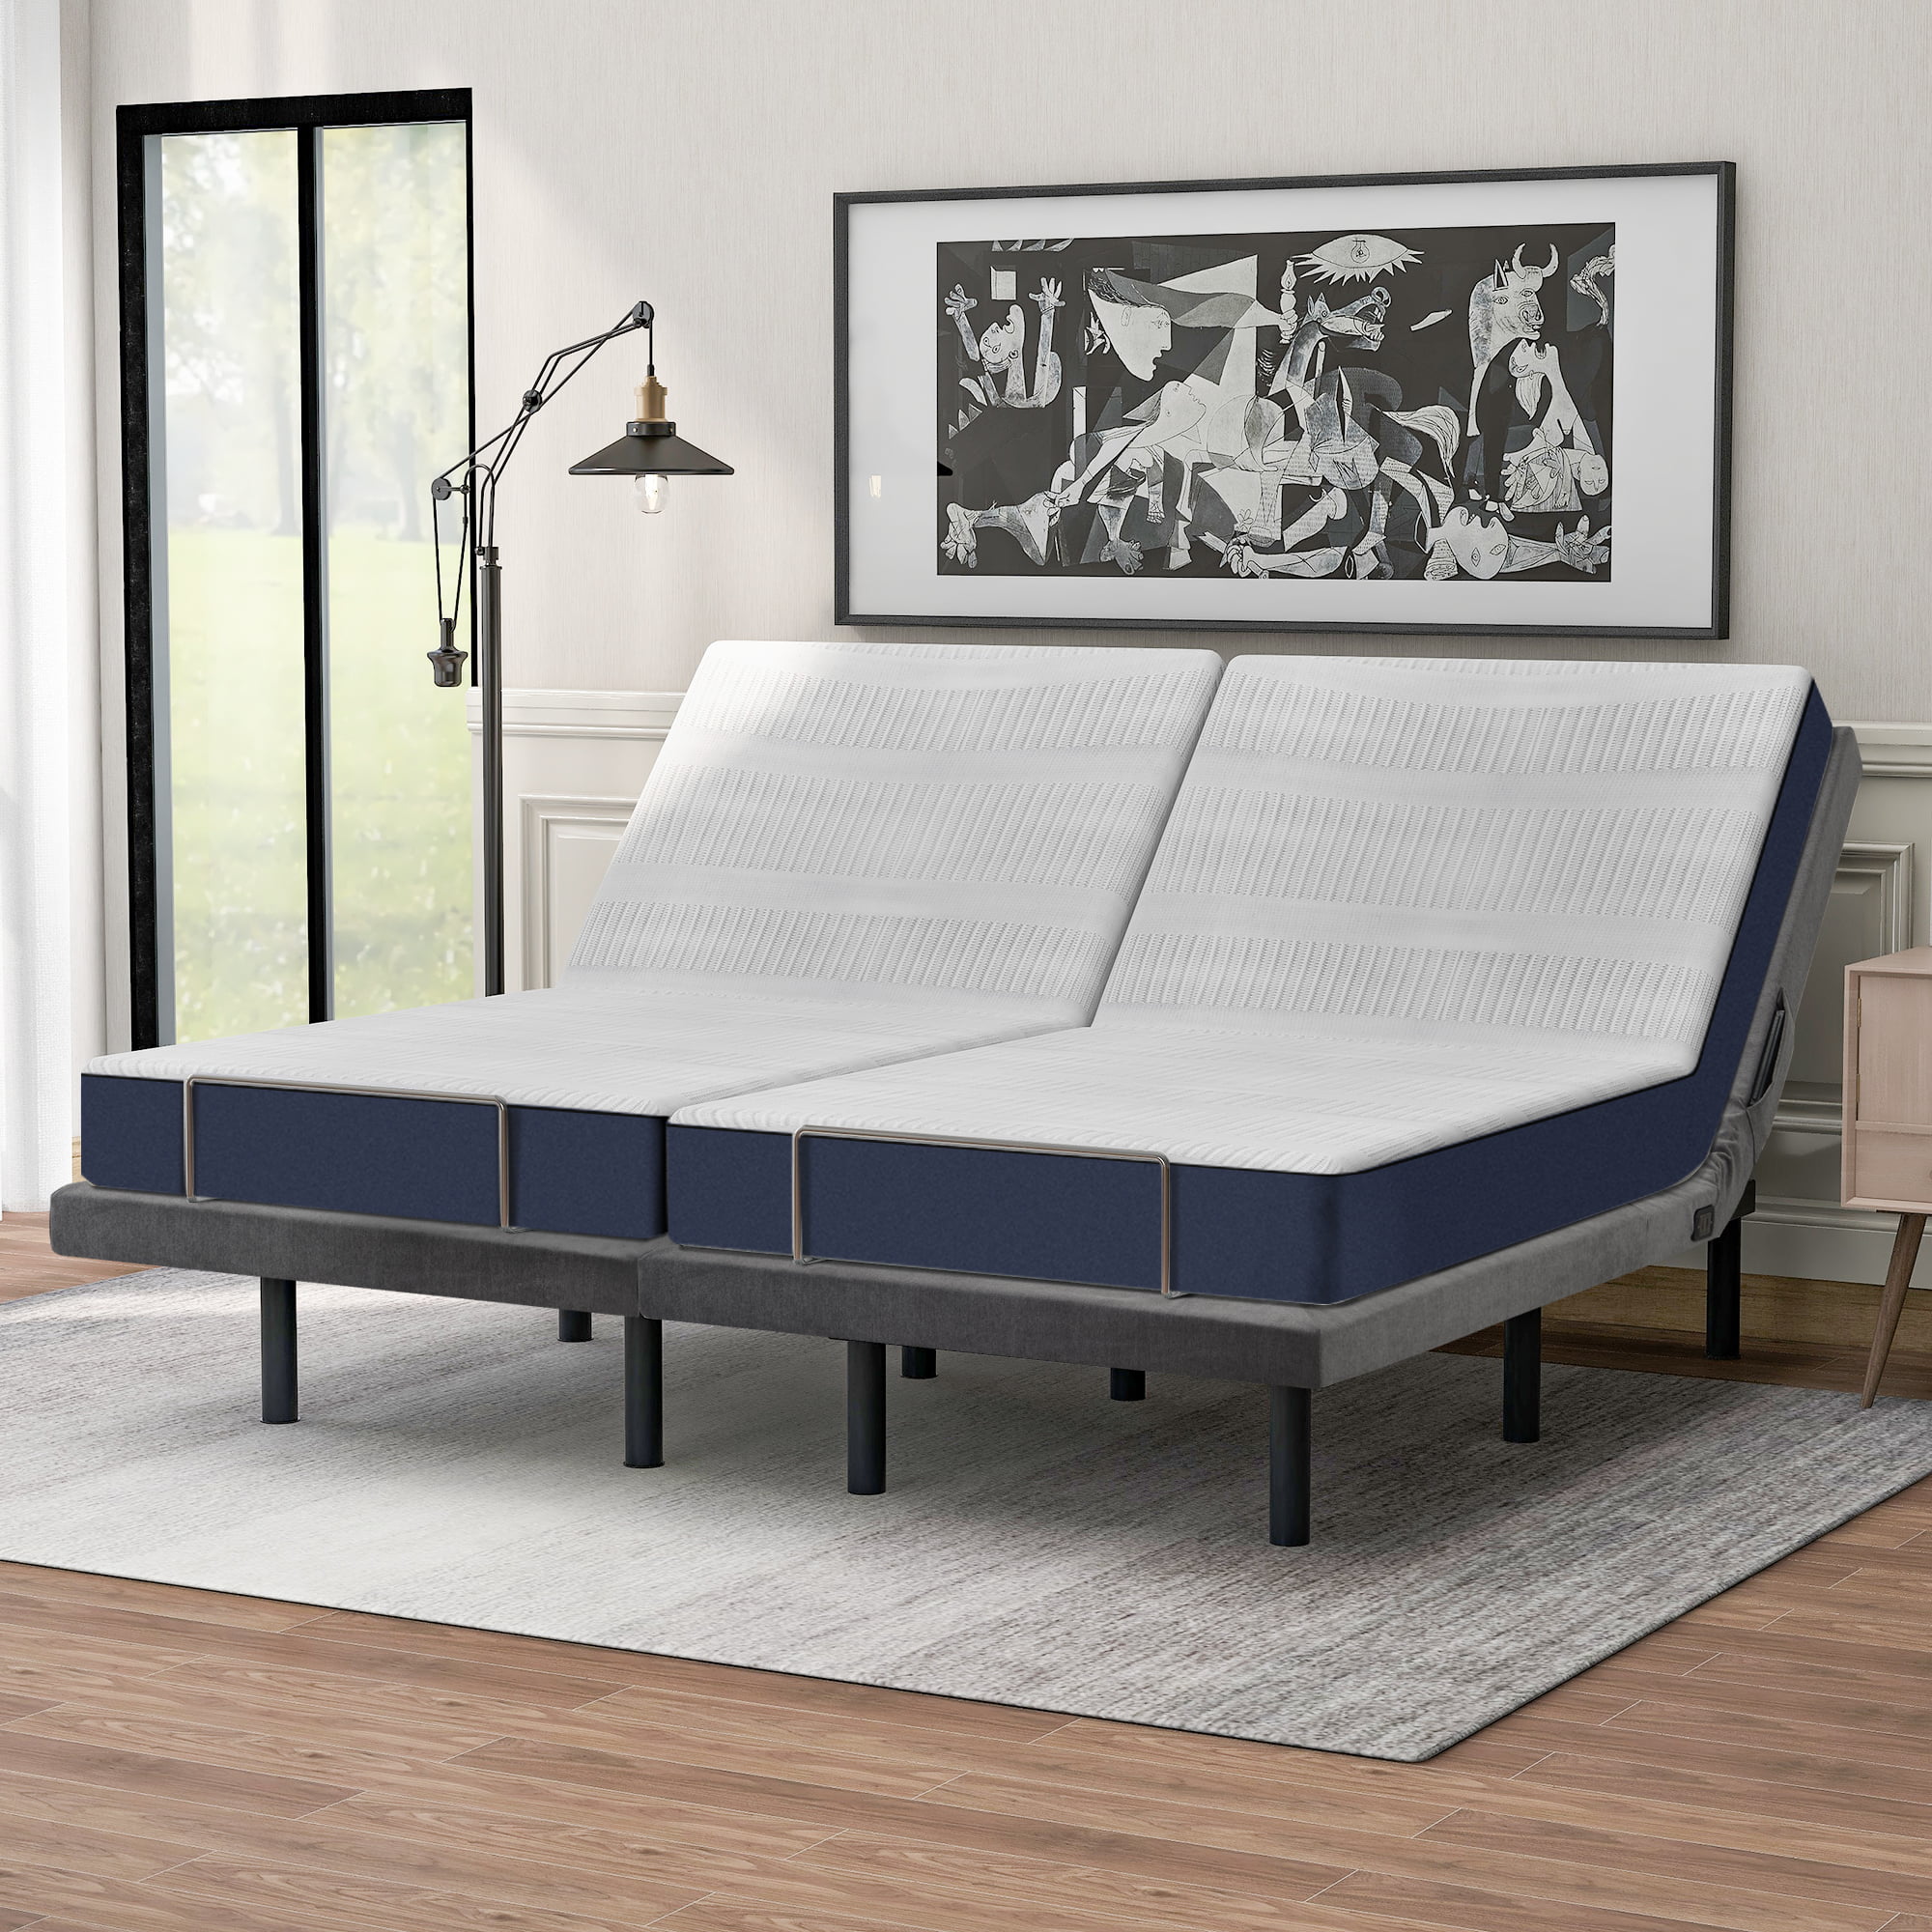 Set Of Two Adjustable Ergonomic Bed, What Size Bed Do Two Twin Xl Make